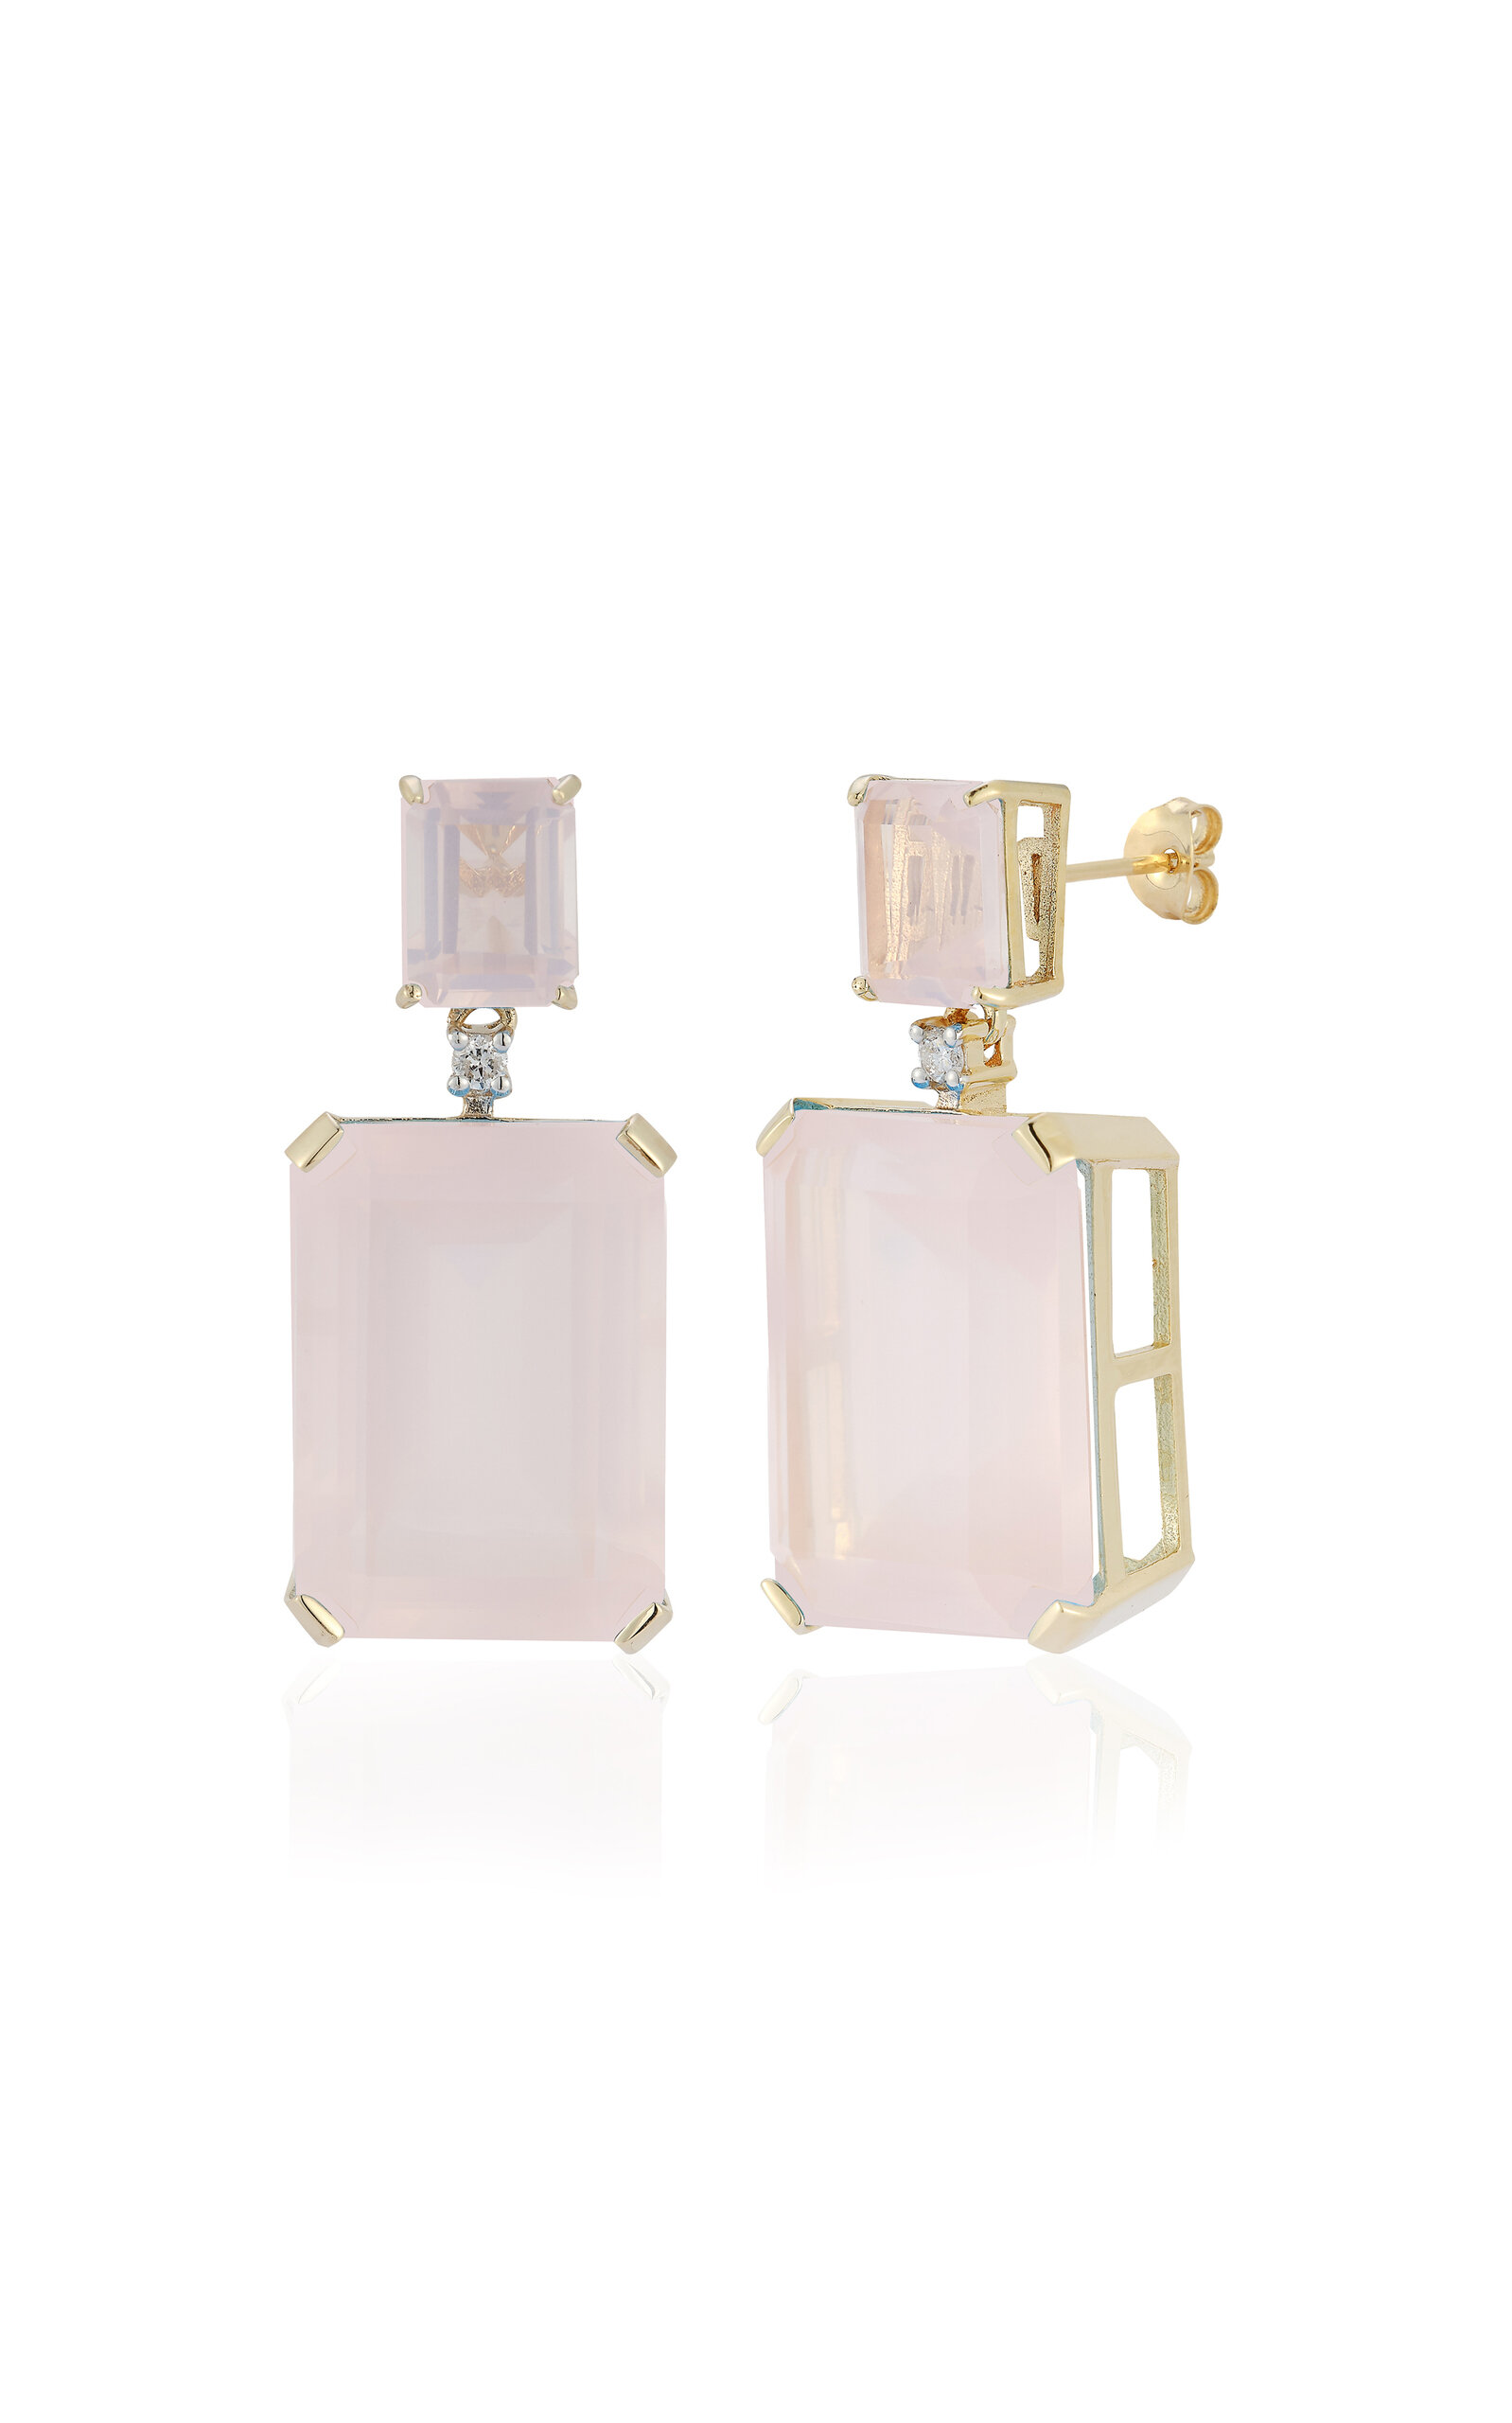 Mateo 14kt Yellow Gold Rose Quartz And Diamond Drop Earrings In Pink